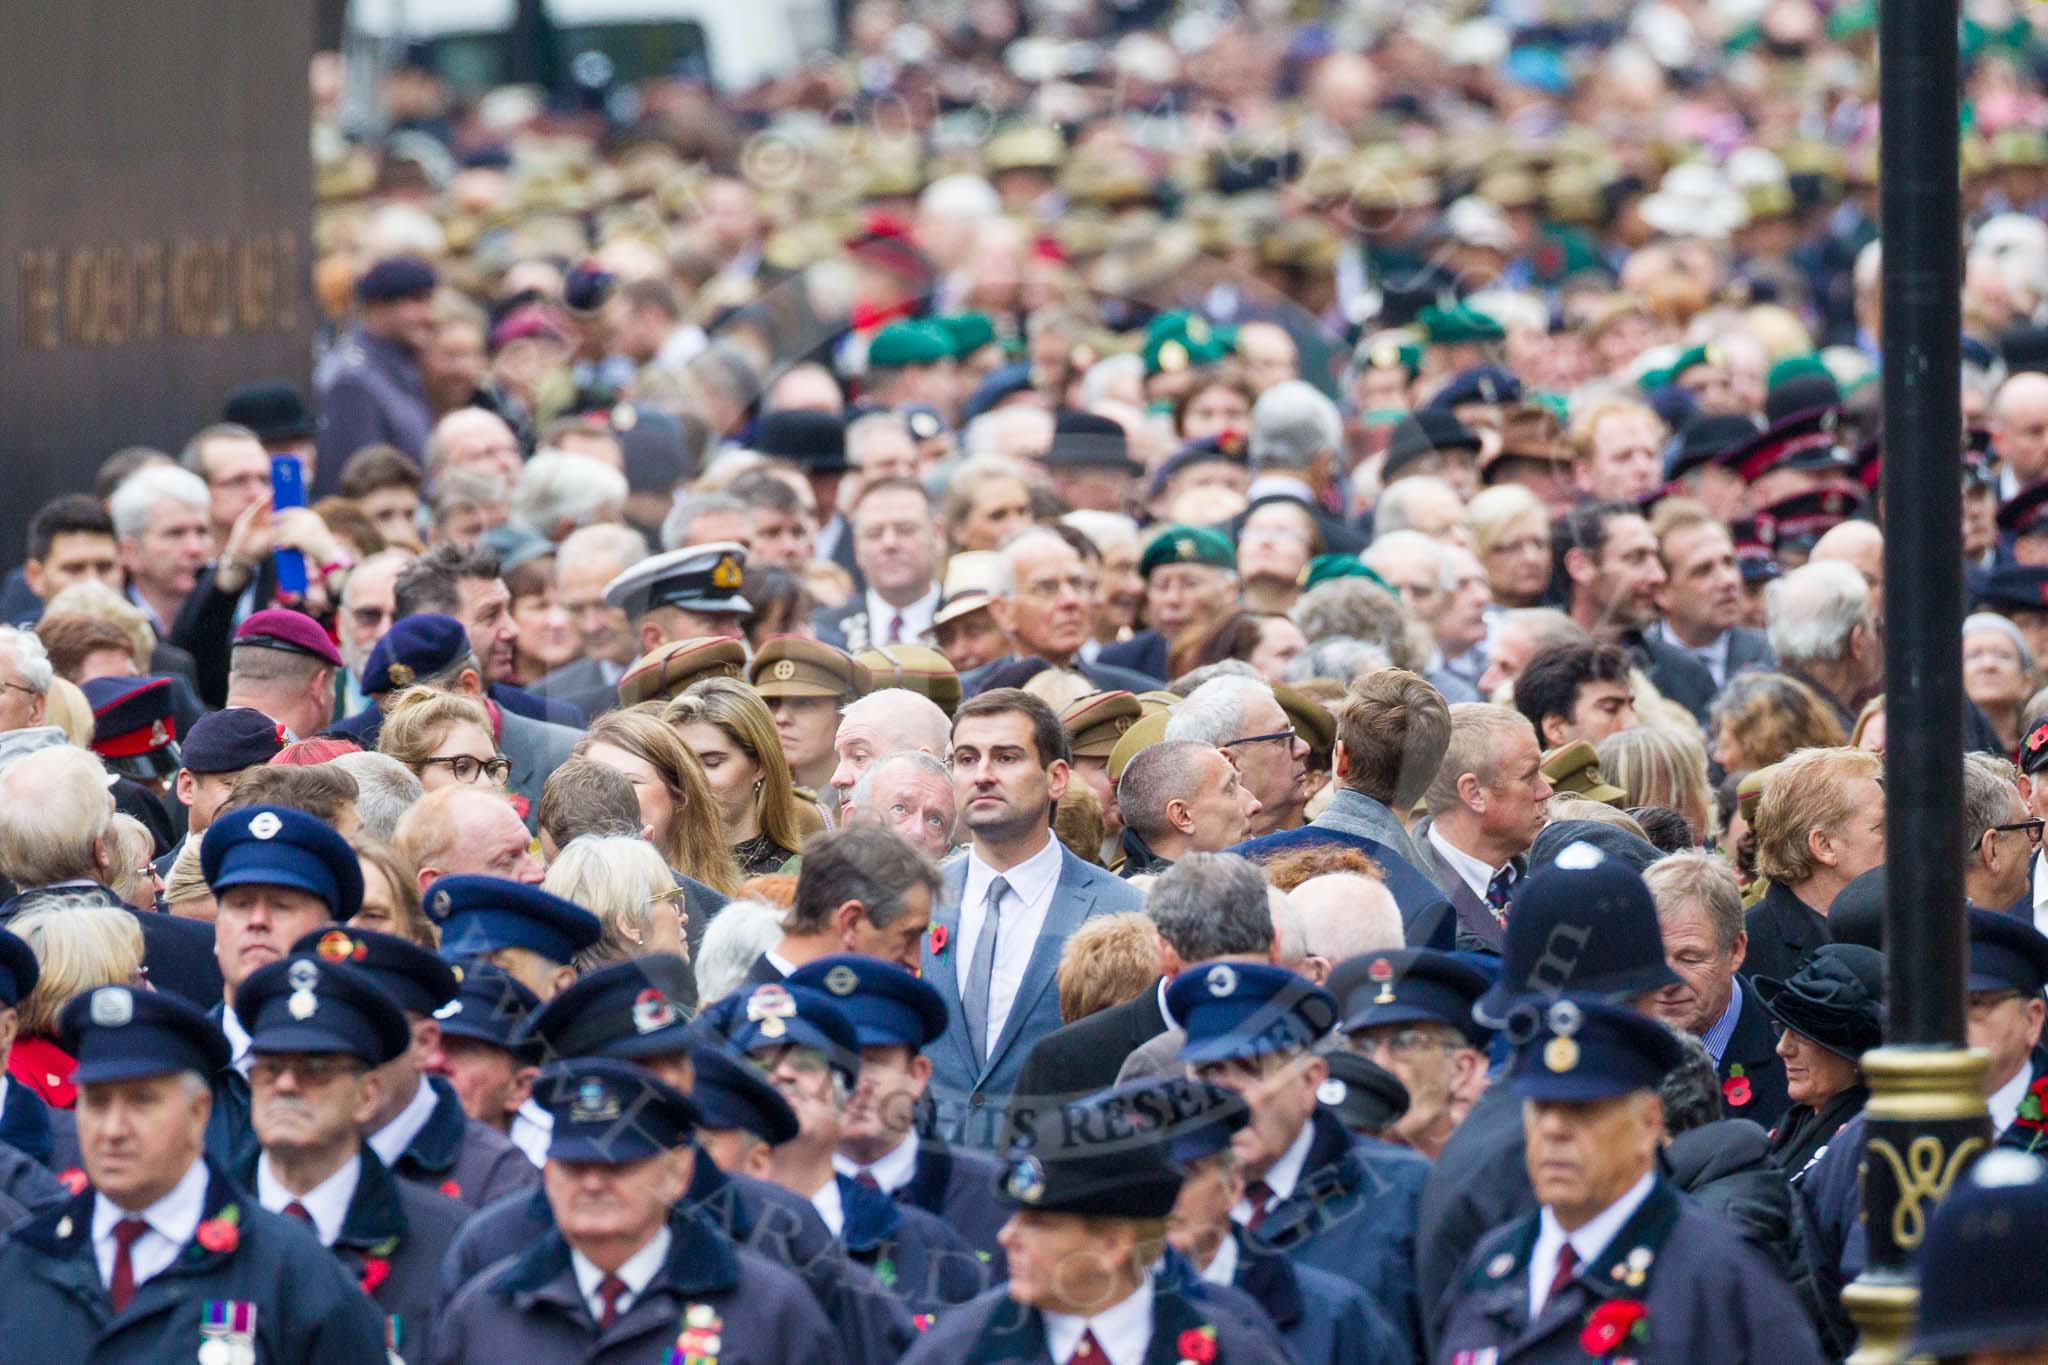 Remembrance Sunday at the Cenotaph 2015: Over 10.000 Veterans waiting for the begin of the March Past, in front the TFL group.
Cenotaph, Whitehall, London SW1,
London,
Greater London,
United Kingdom,
on 08 November 2015 at 11:26, image #7